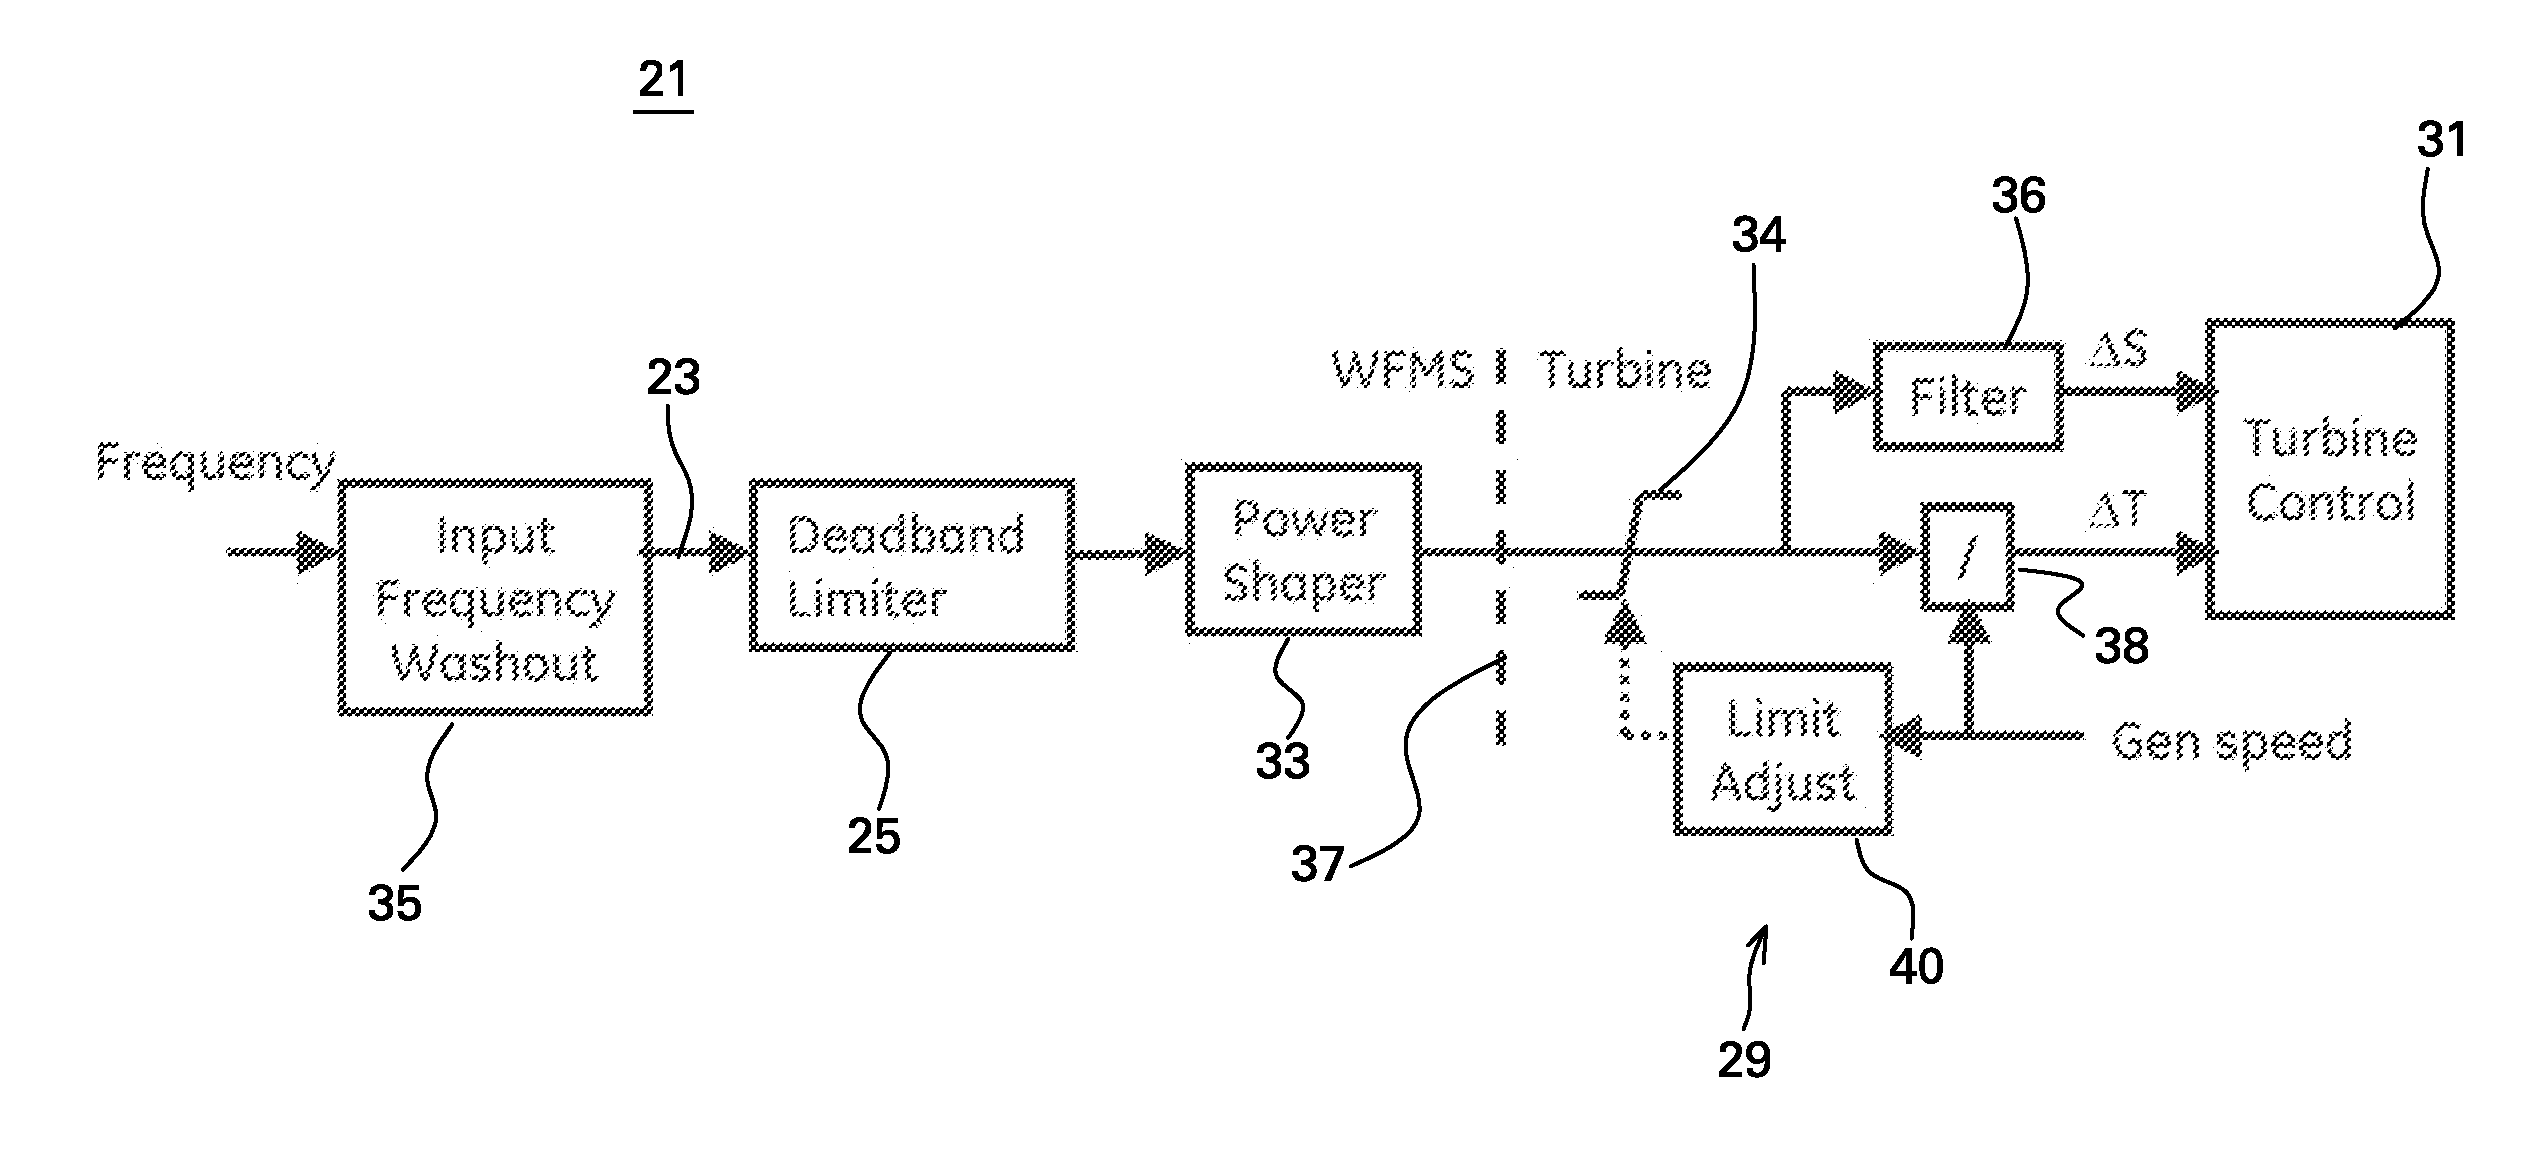 Power generation stabilization control systems and methods